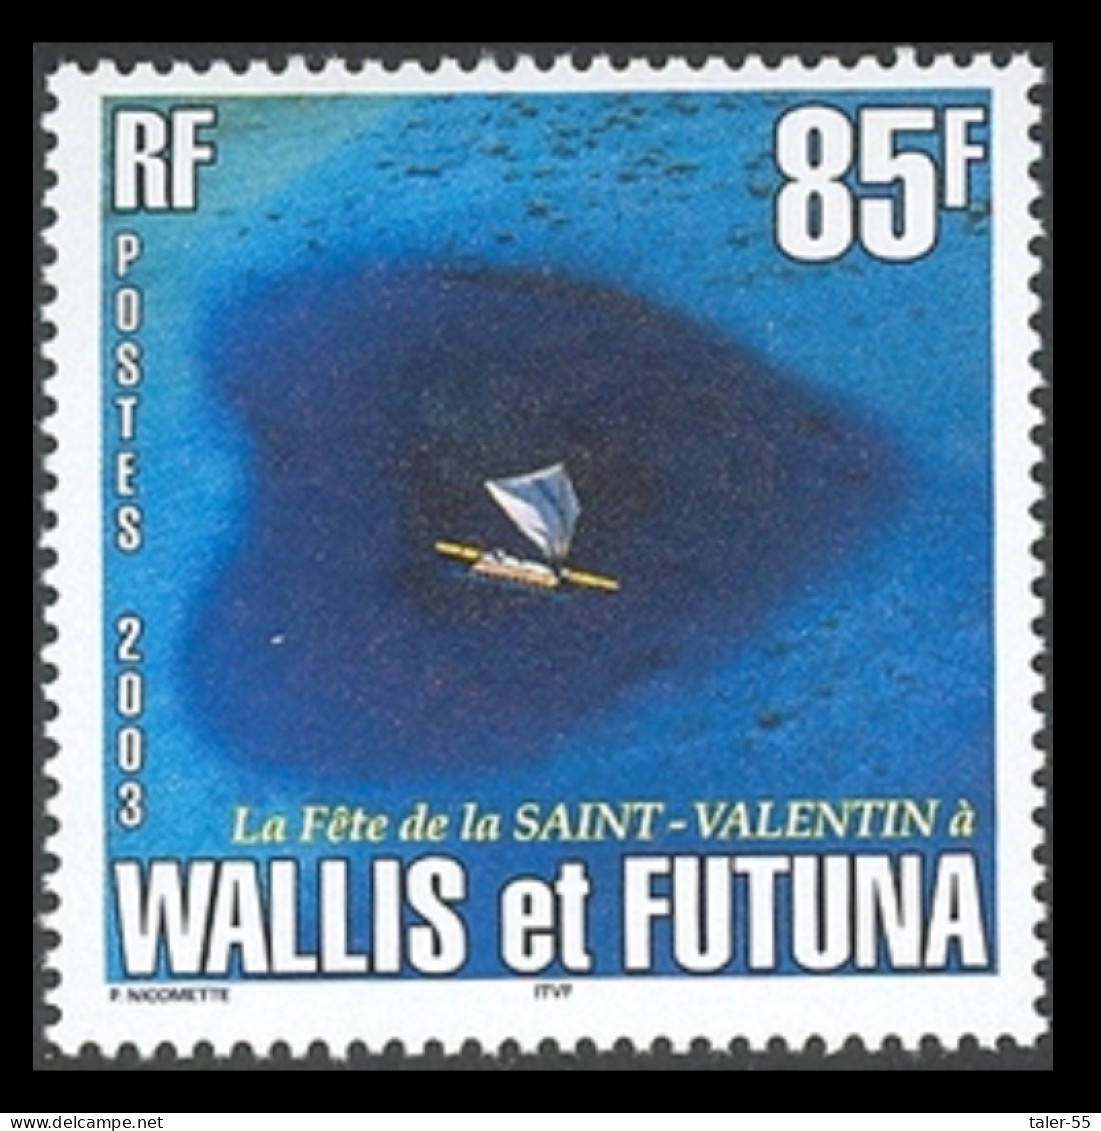 Wallis And Futuna St Valentine's Day 2003 MNH SG#818 Sc#564 - Unused Stamps